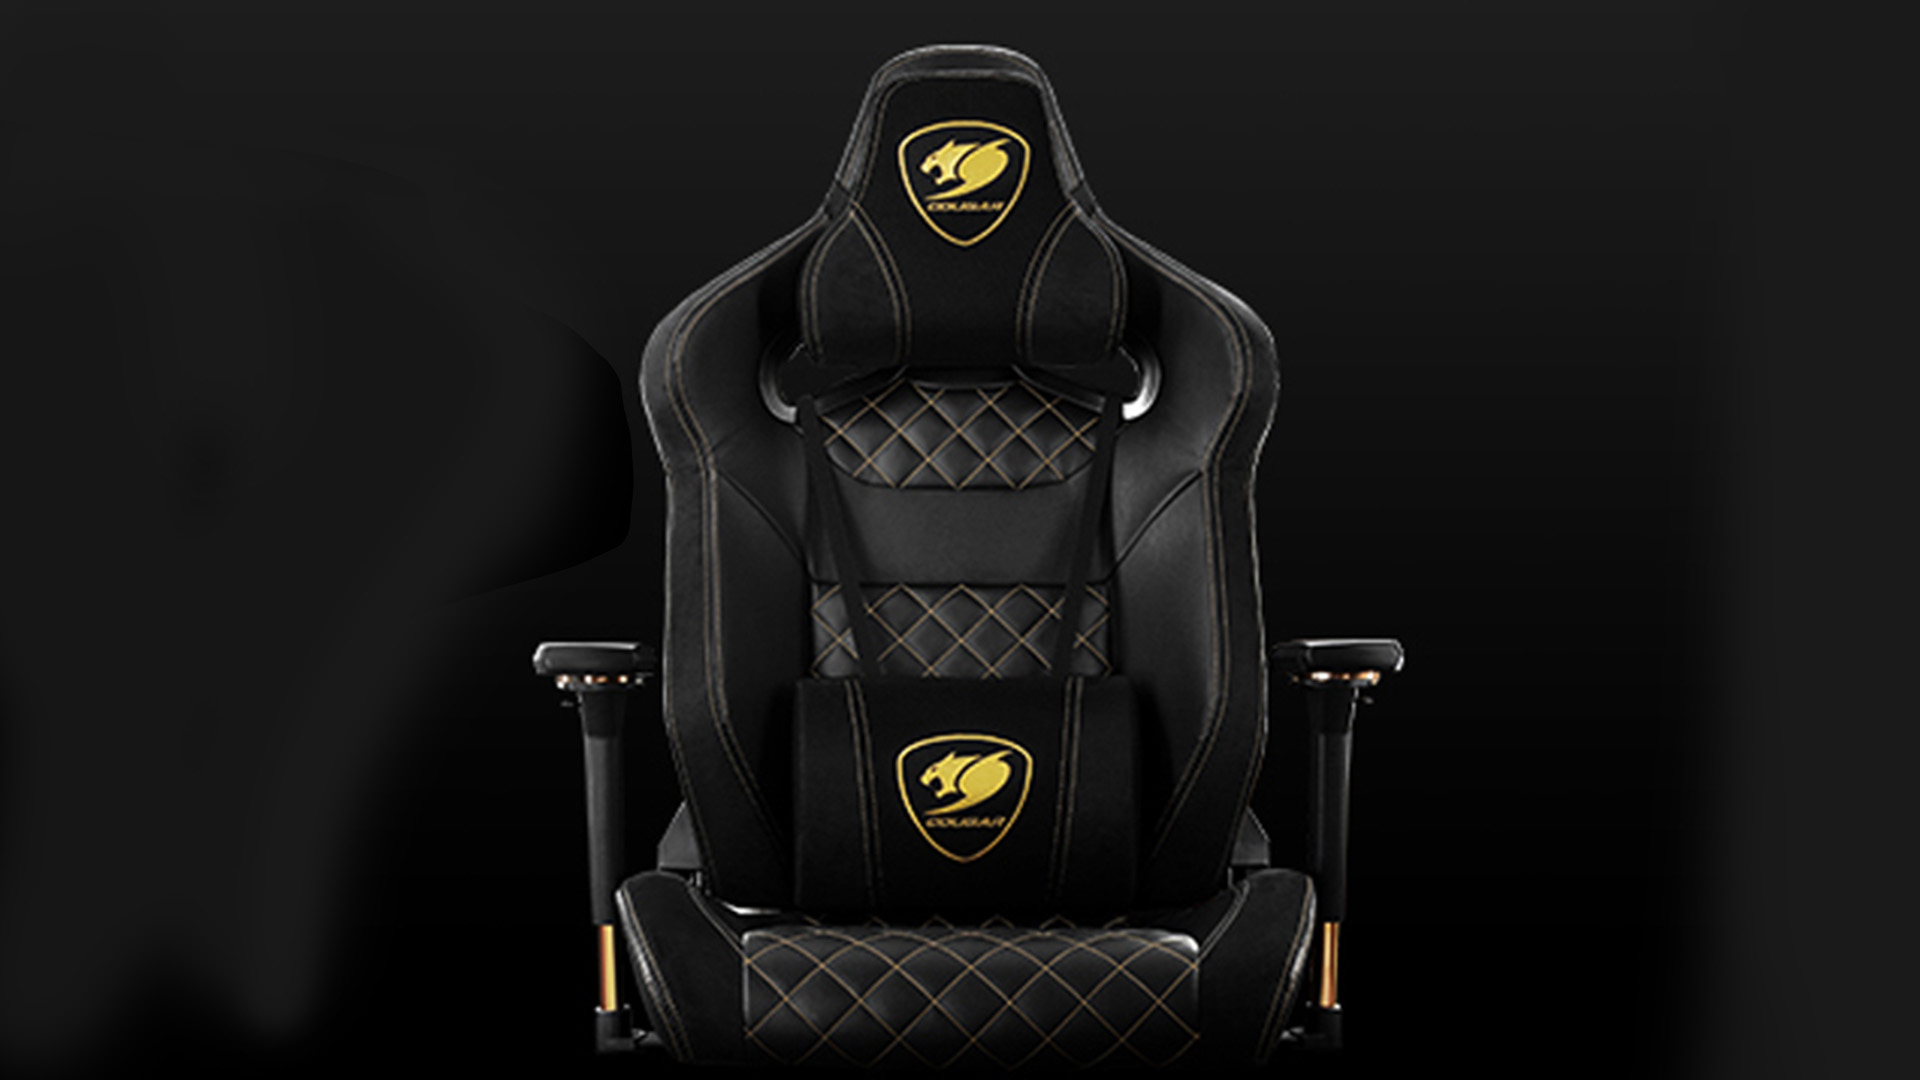 COUGAR ARMOR Gaming Chair Review